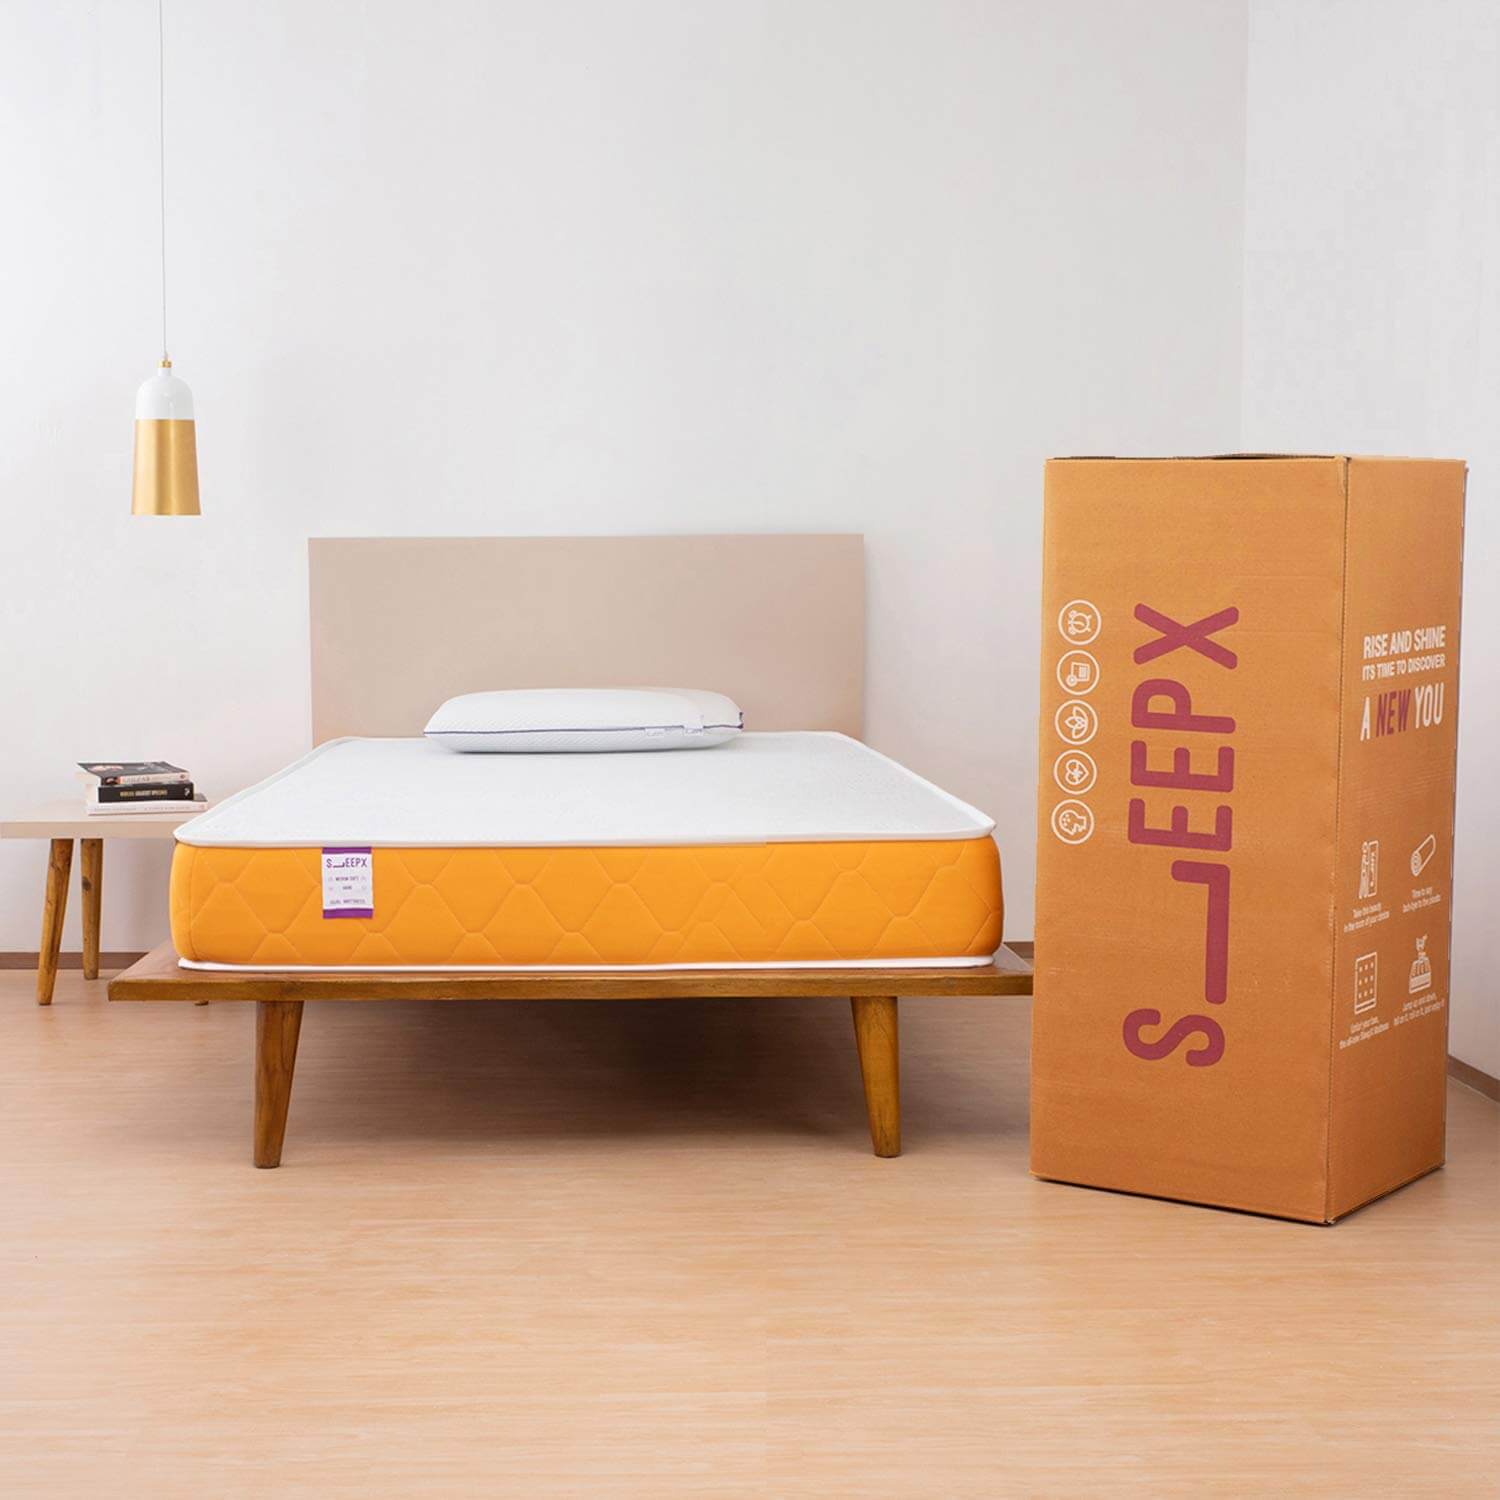 Mattress-for-single-bed